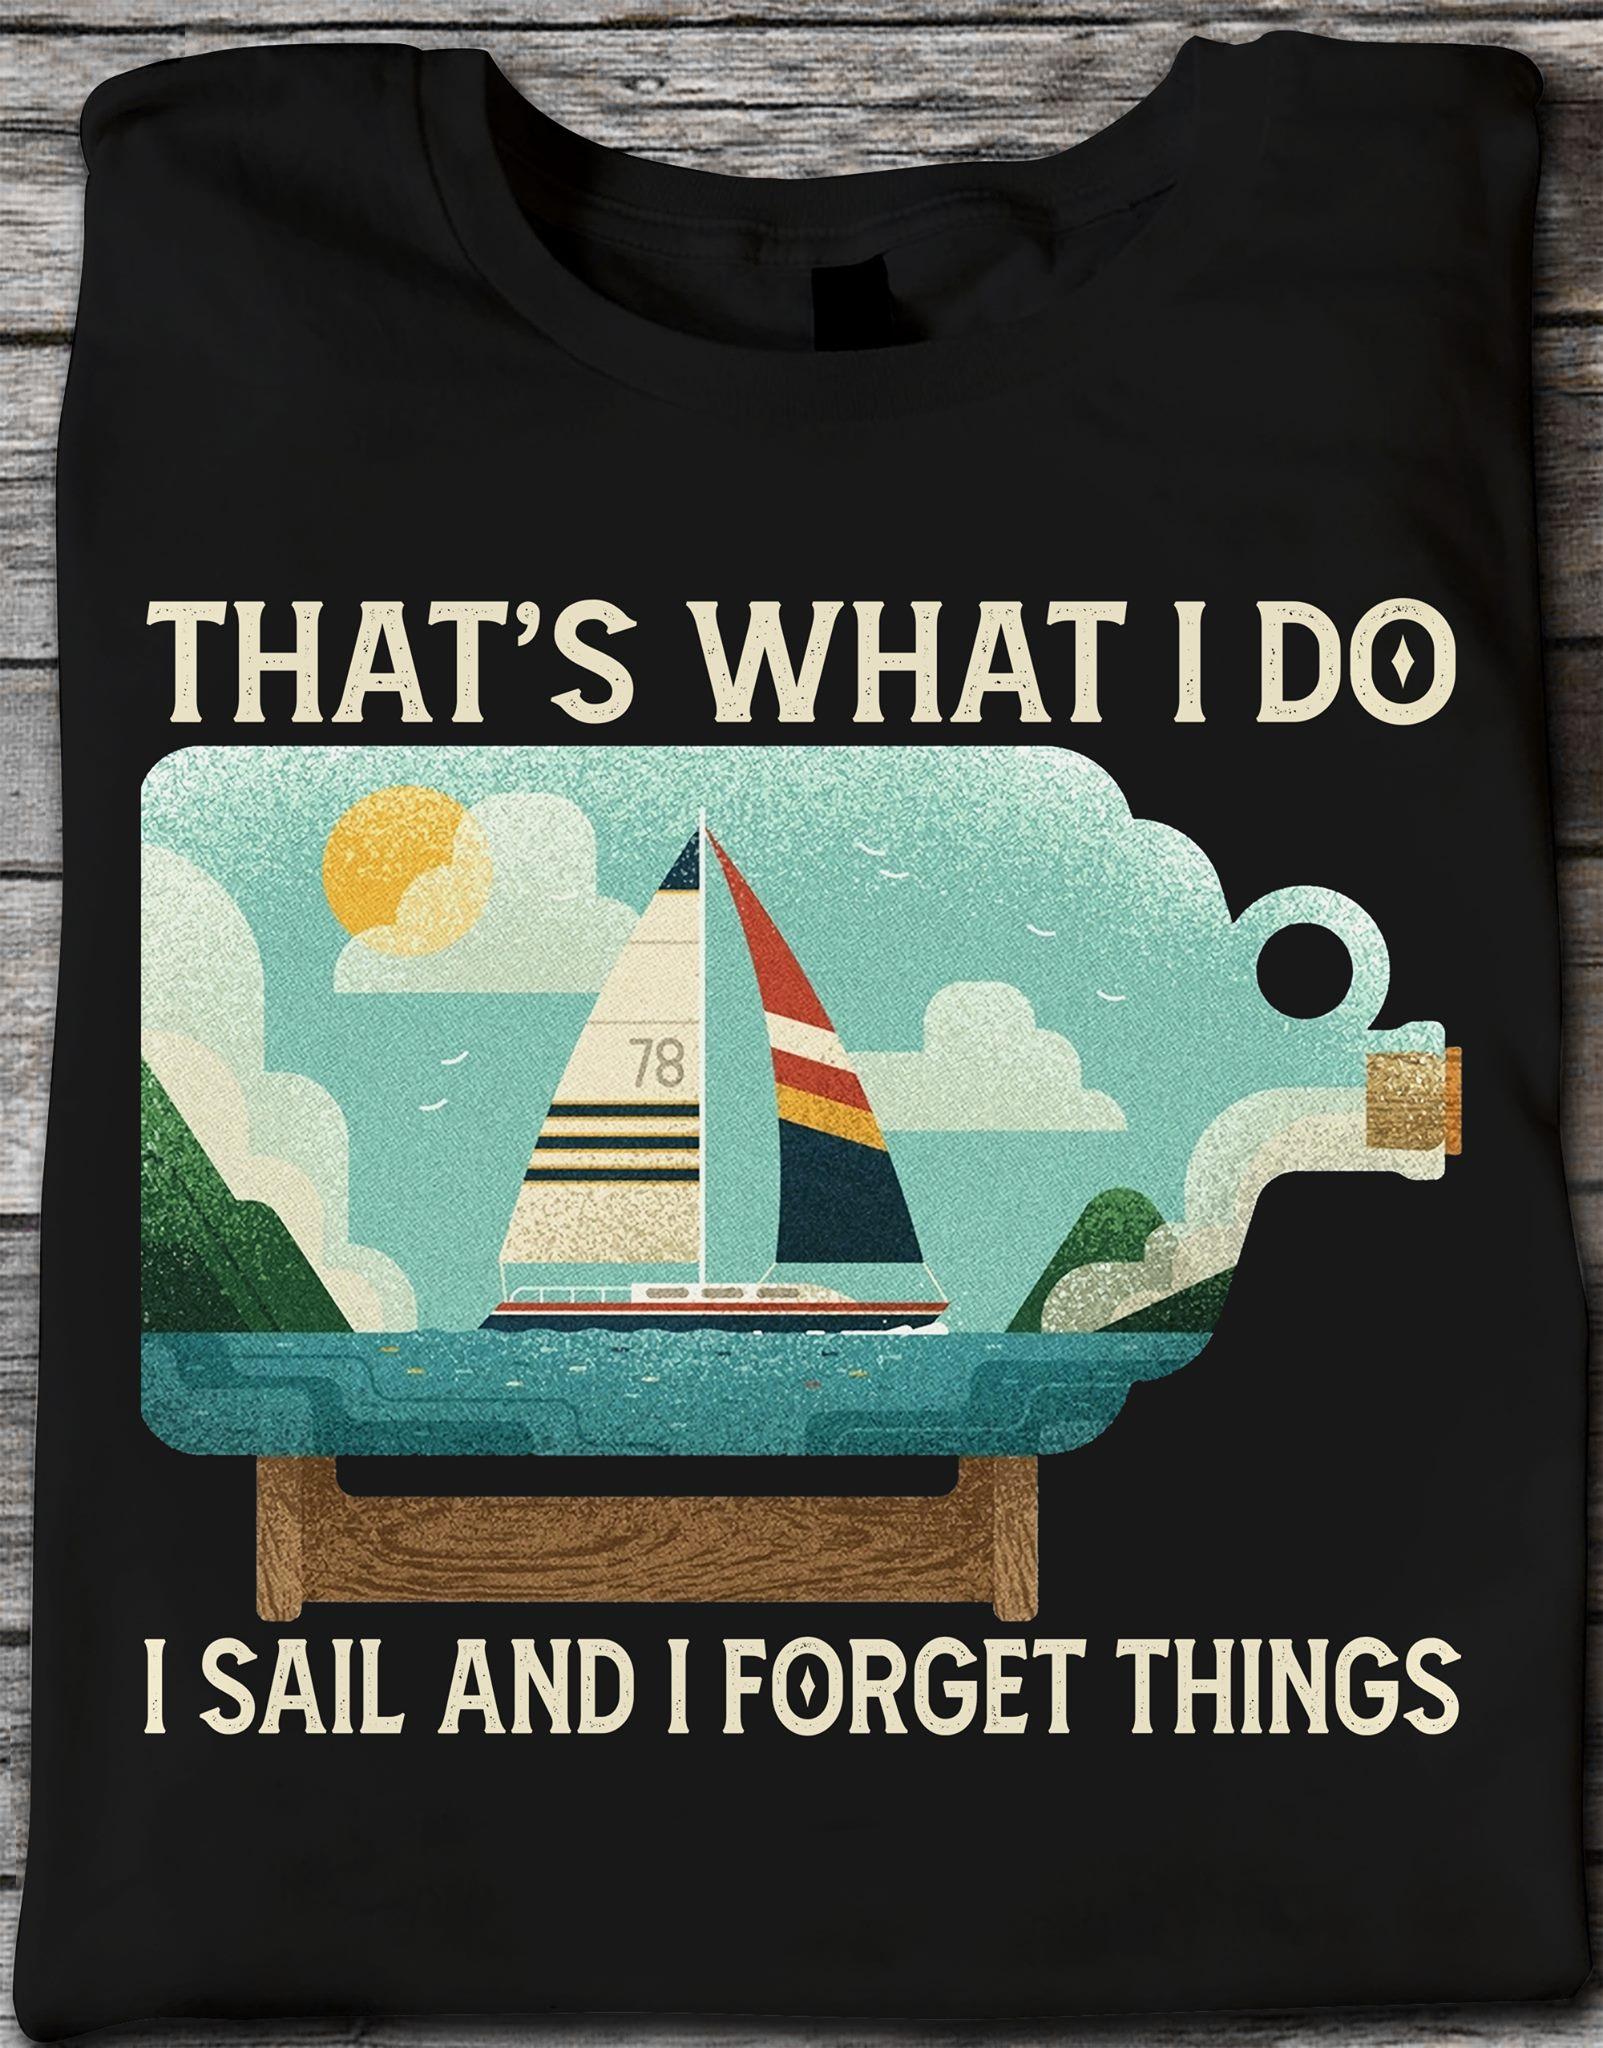 That's what I do I sail and I forget things - Sailing people gift, love to go sailing